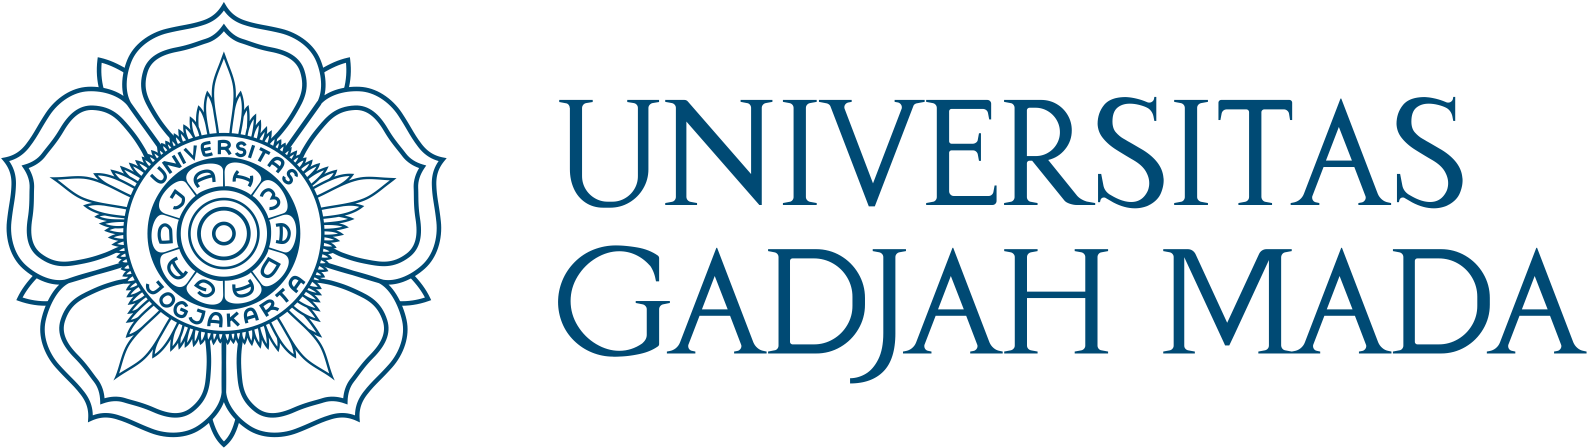 Guy Has Recently Edited A Collection Of Essays Based - Gadjah Mada University (3376x774), Png Download